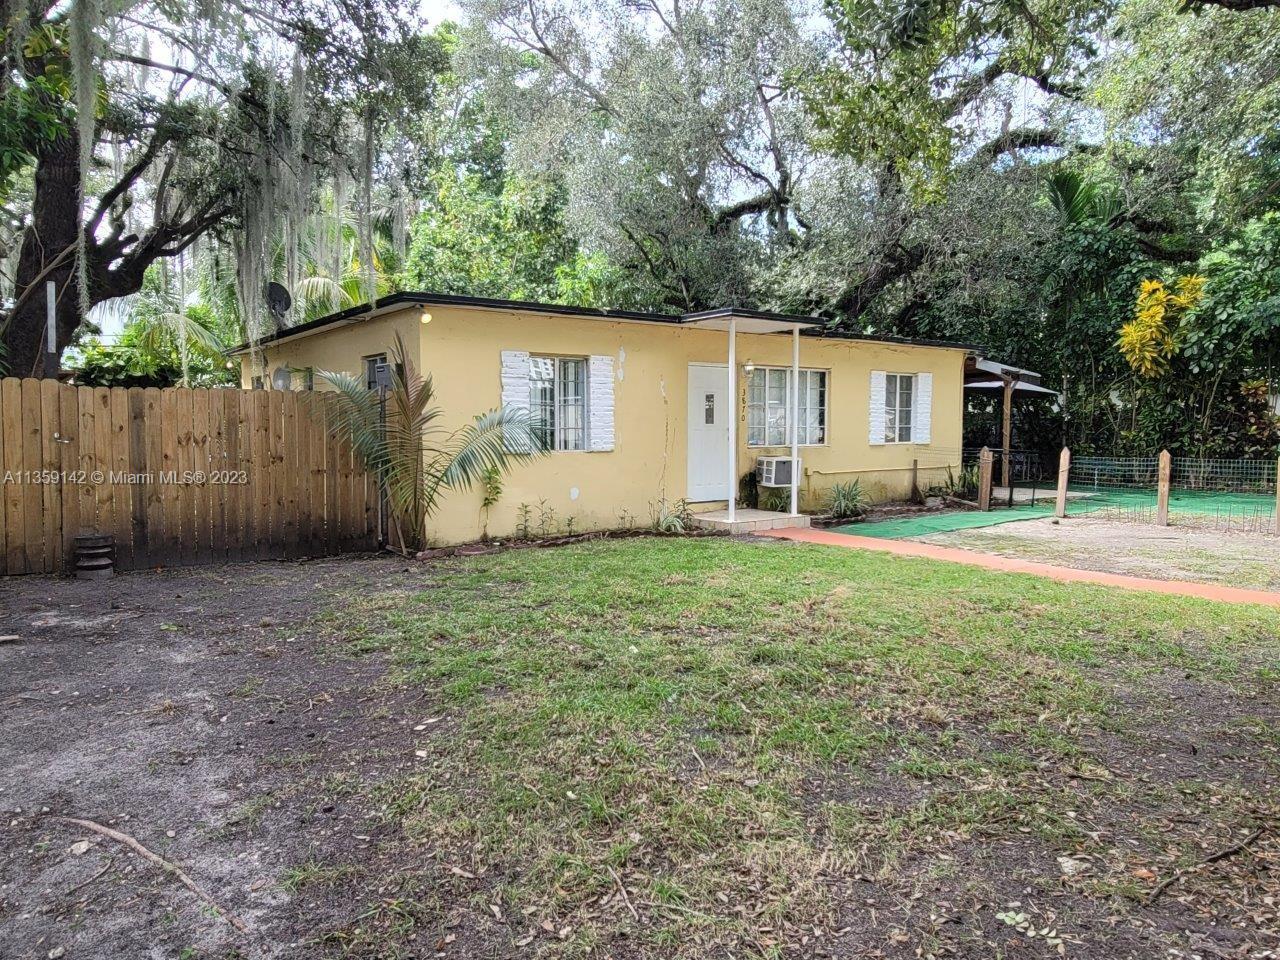 Opportunity awaits a savvy Buyer in Coconut Grove. Original 3/2 home on a beautiful lush lot can be rehabbed or
dropped. 80 x 100 lot meets ideal NCD3 requirements.